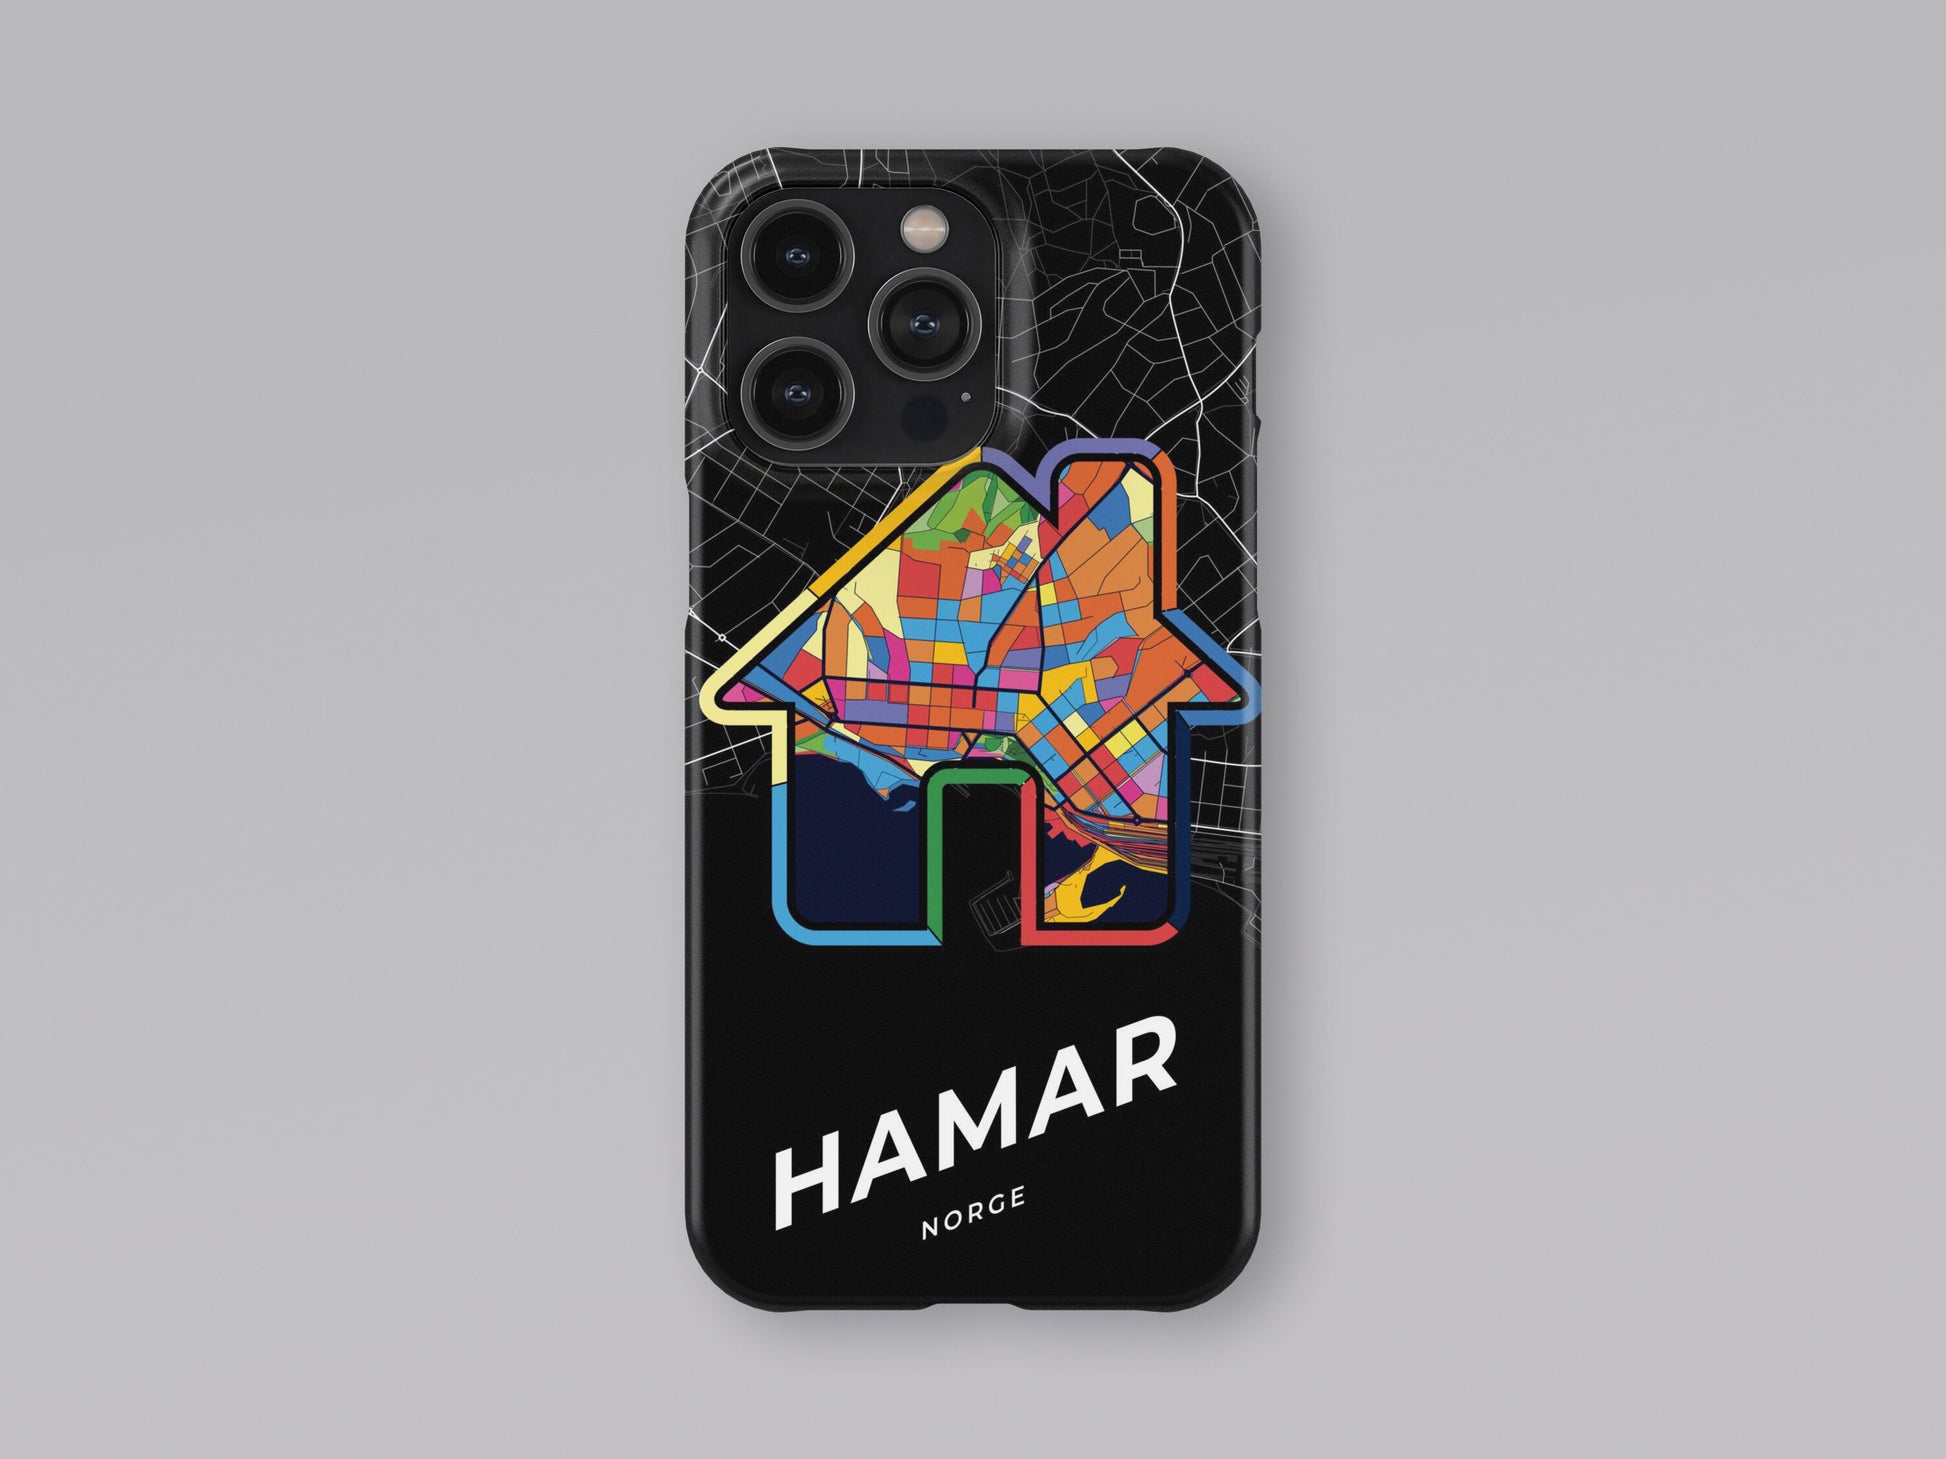 Hamar Norway slim phone case with colorful icon. Birthday, wedding or housewarming gift. Couple match cases. 3